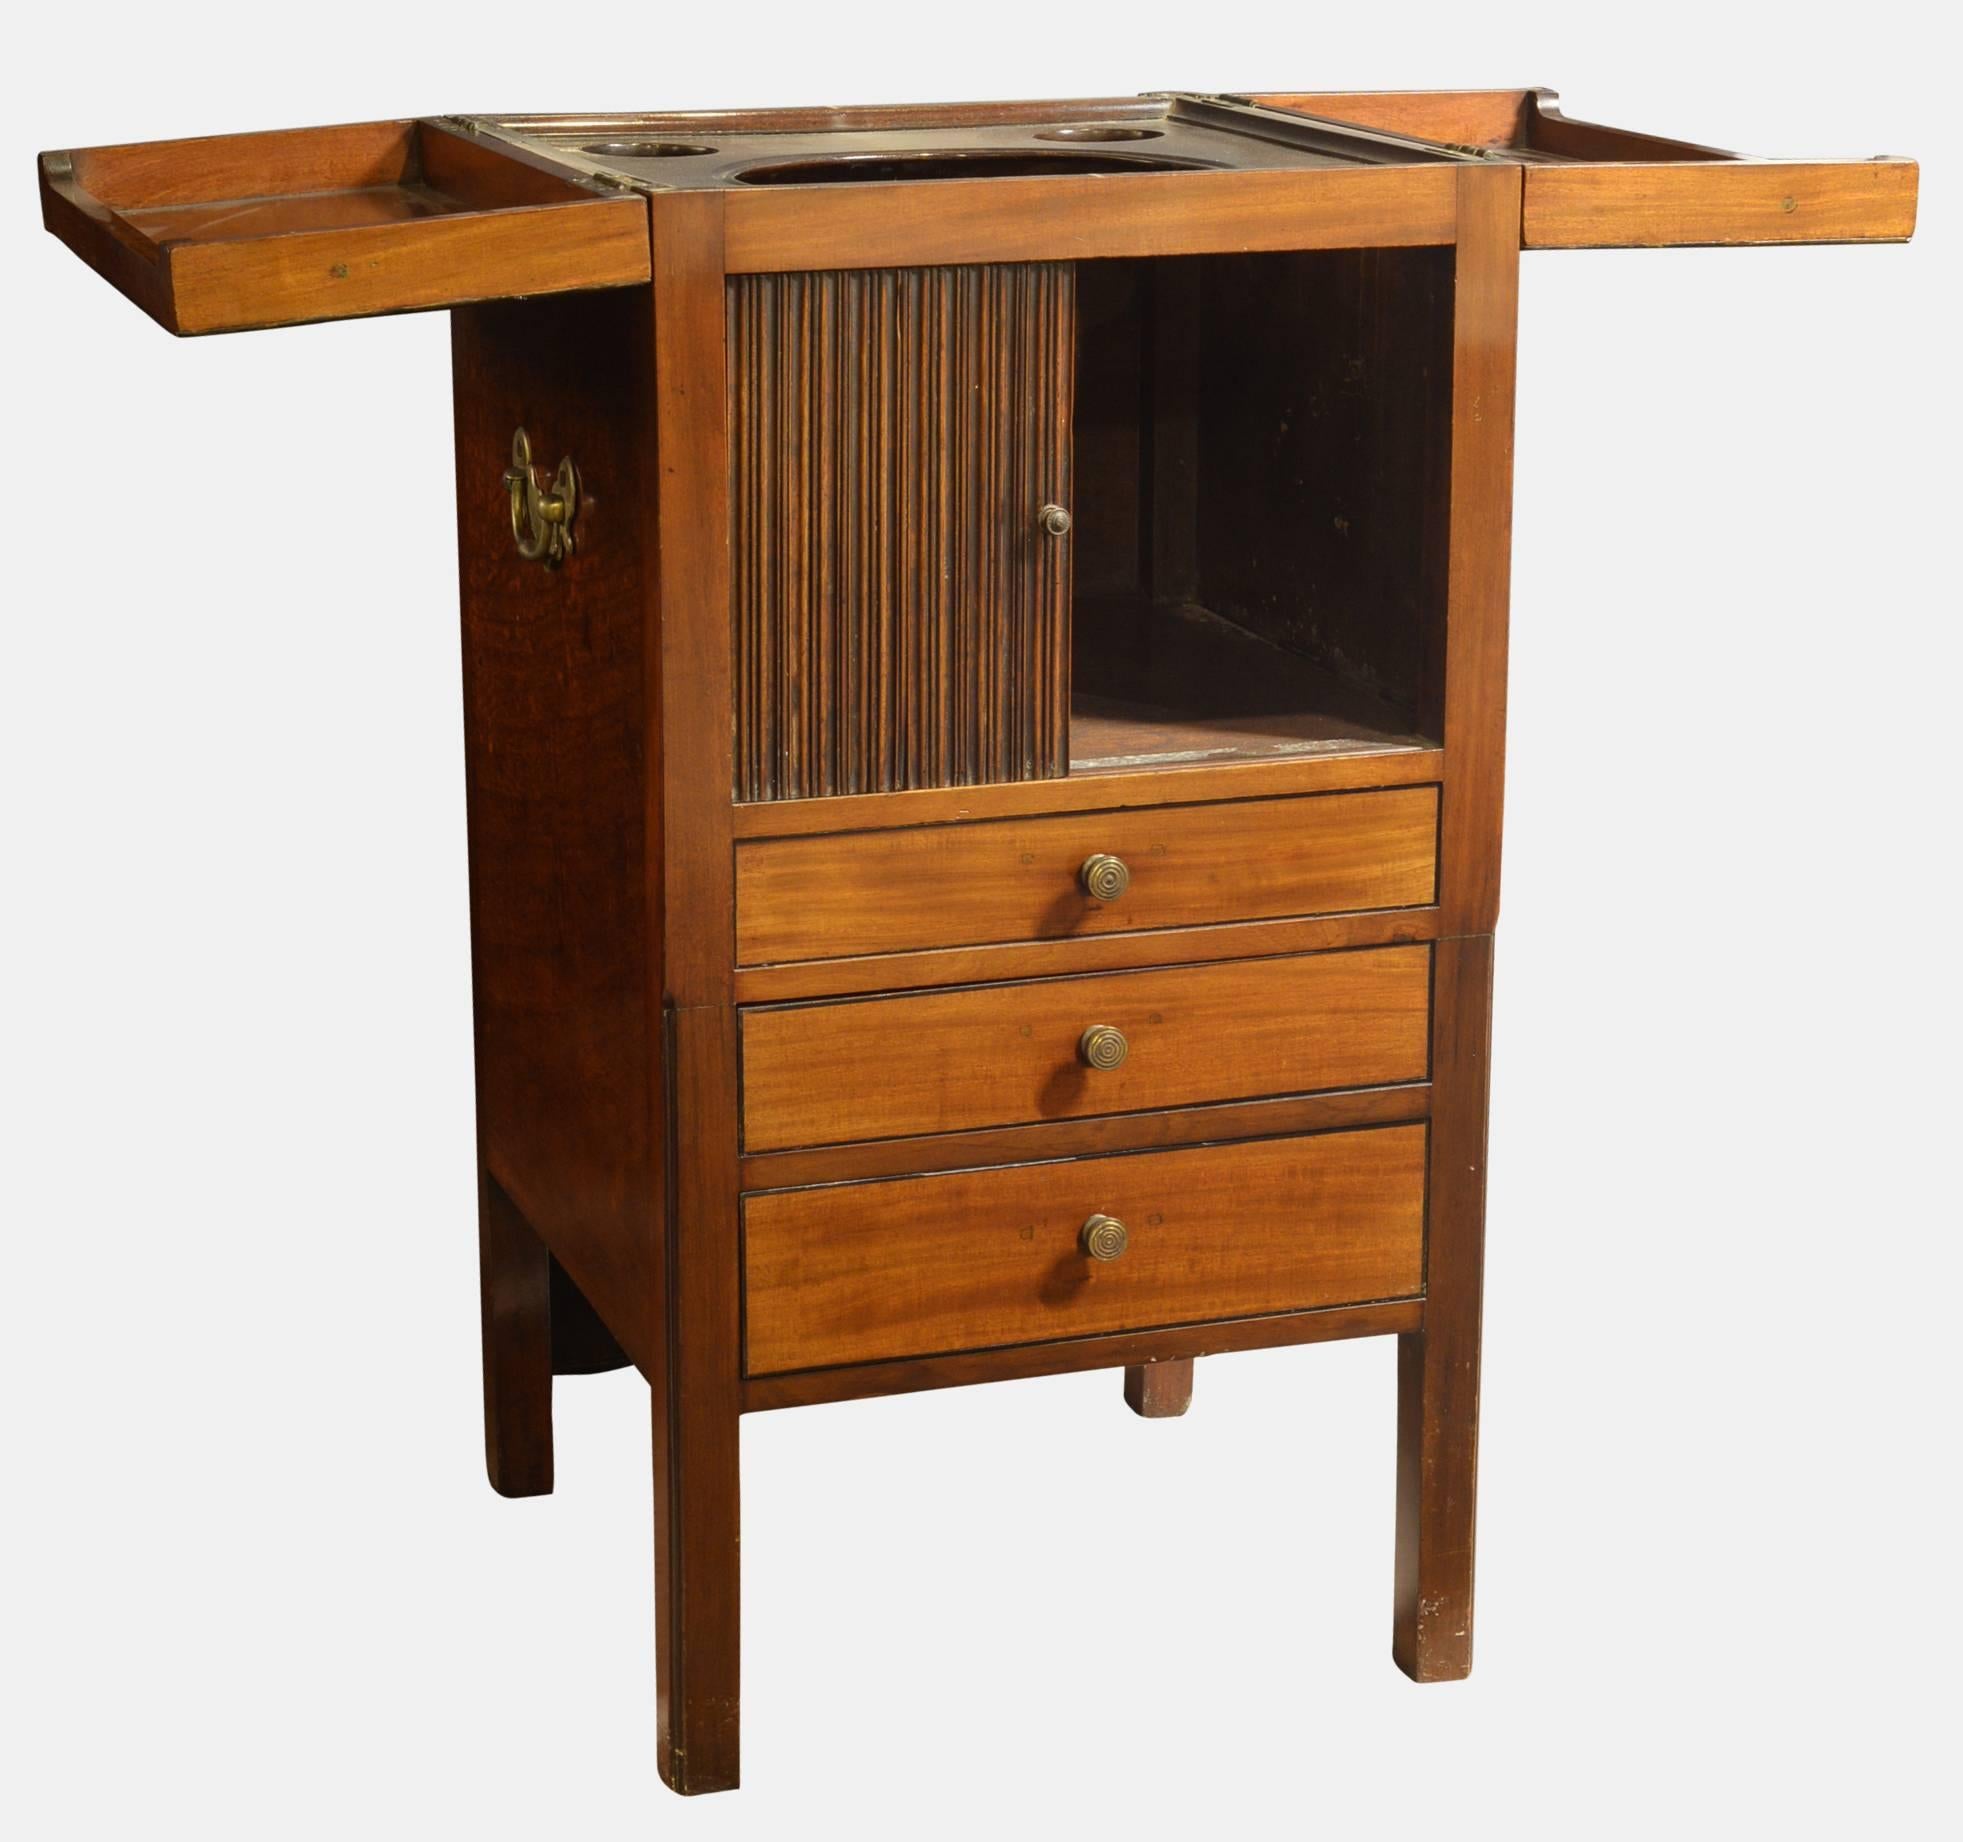 Georgian mahogany washstand with carrying handles and a tambour door. Three drawers and original interior with folded top.